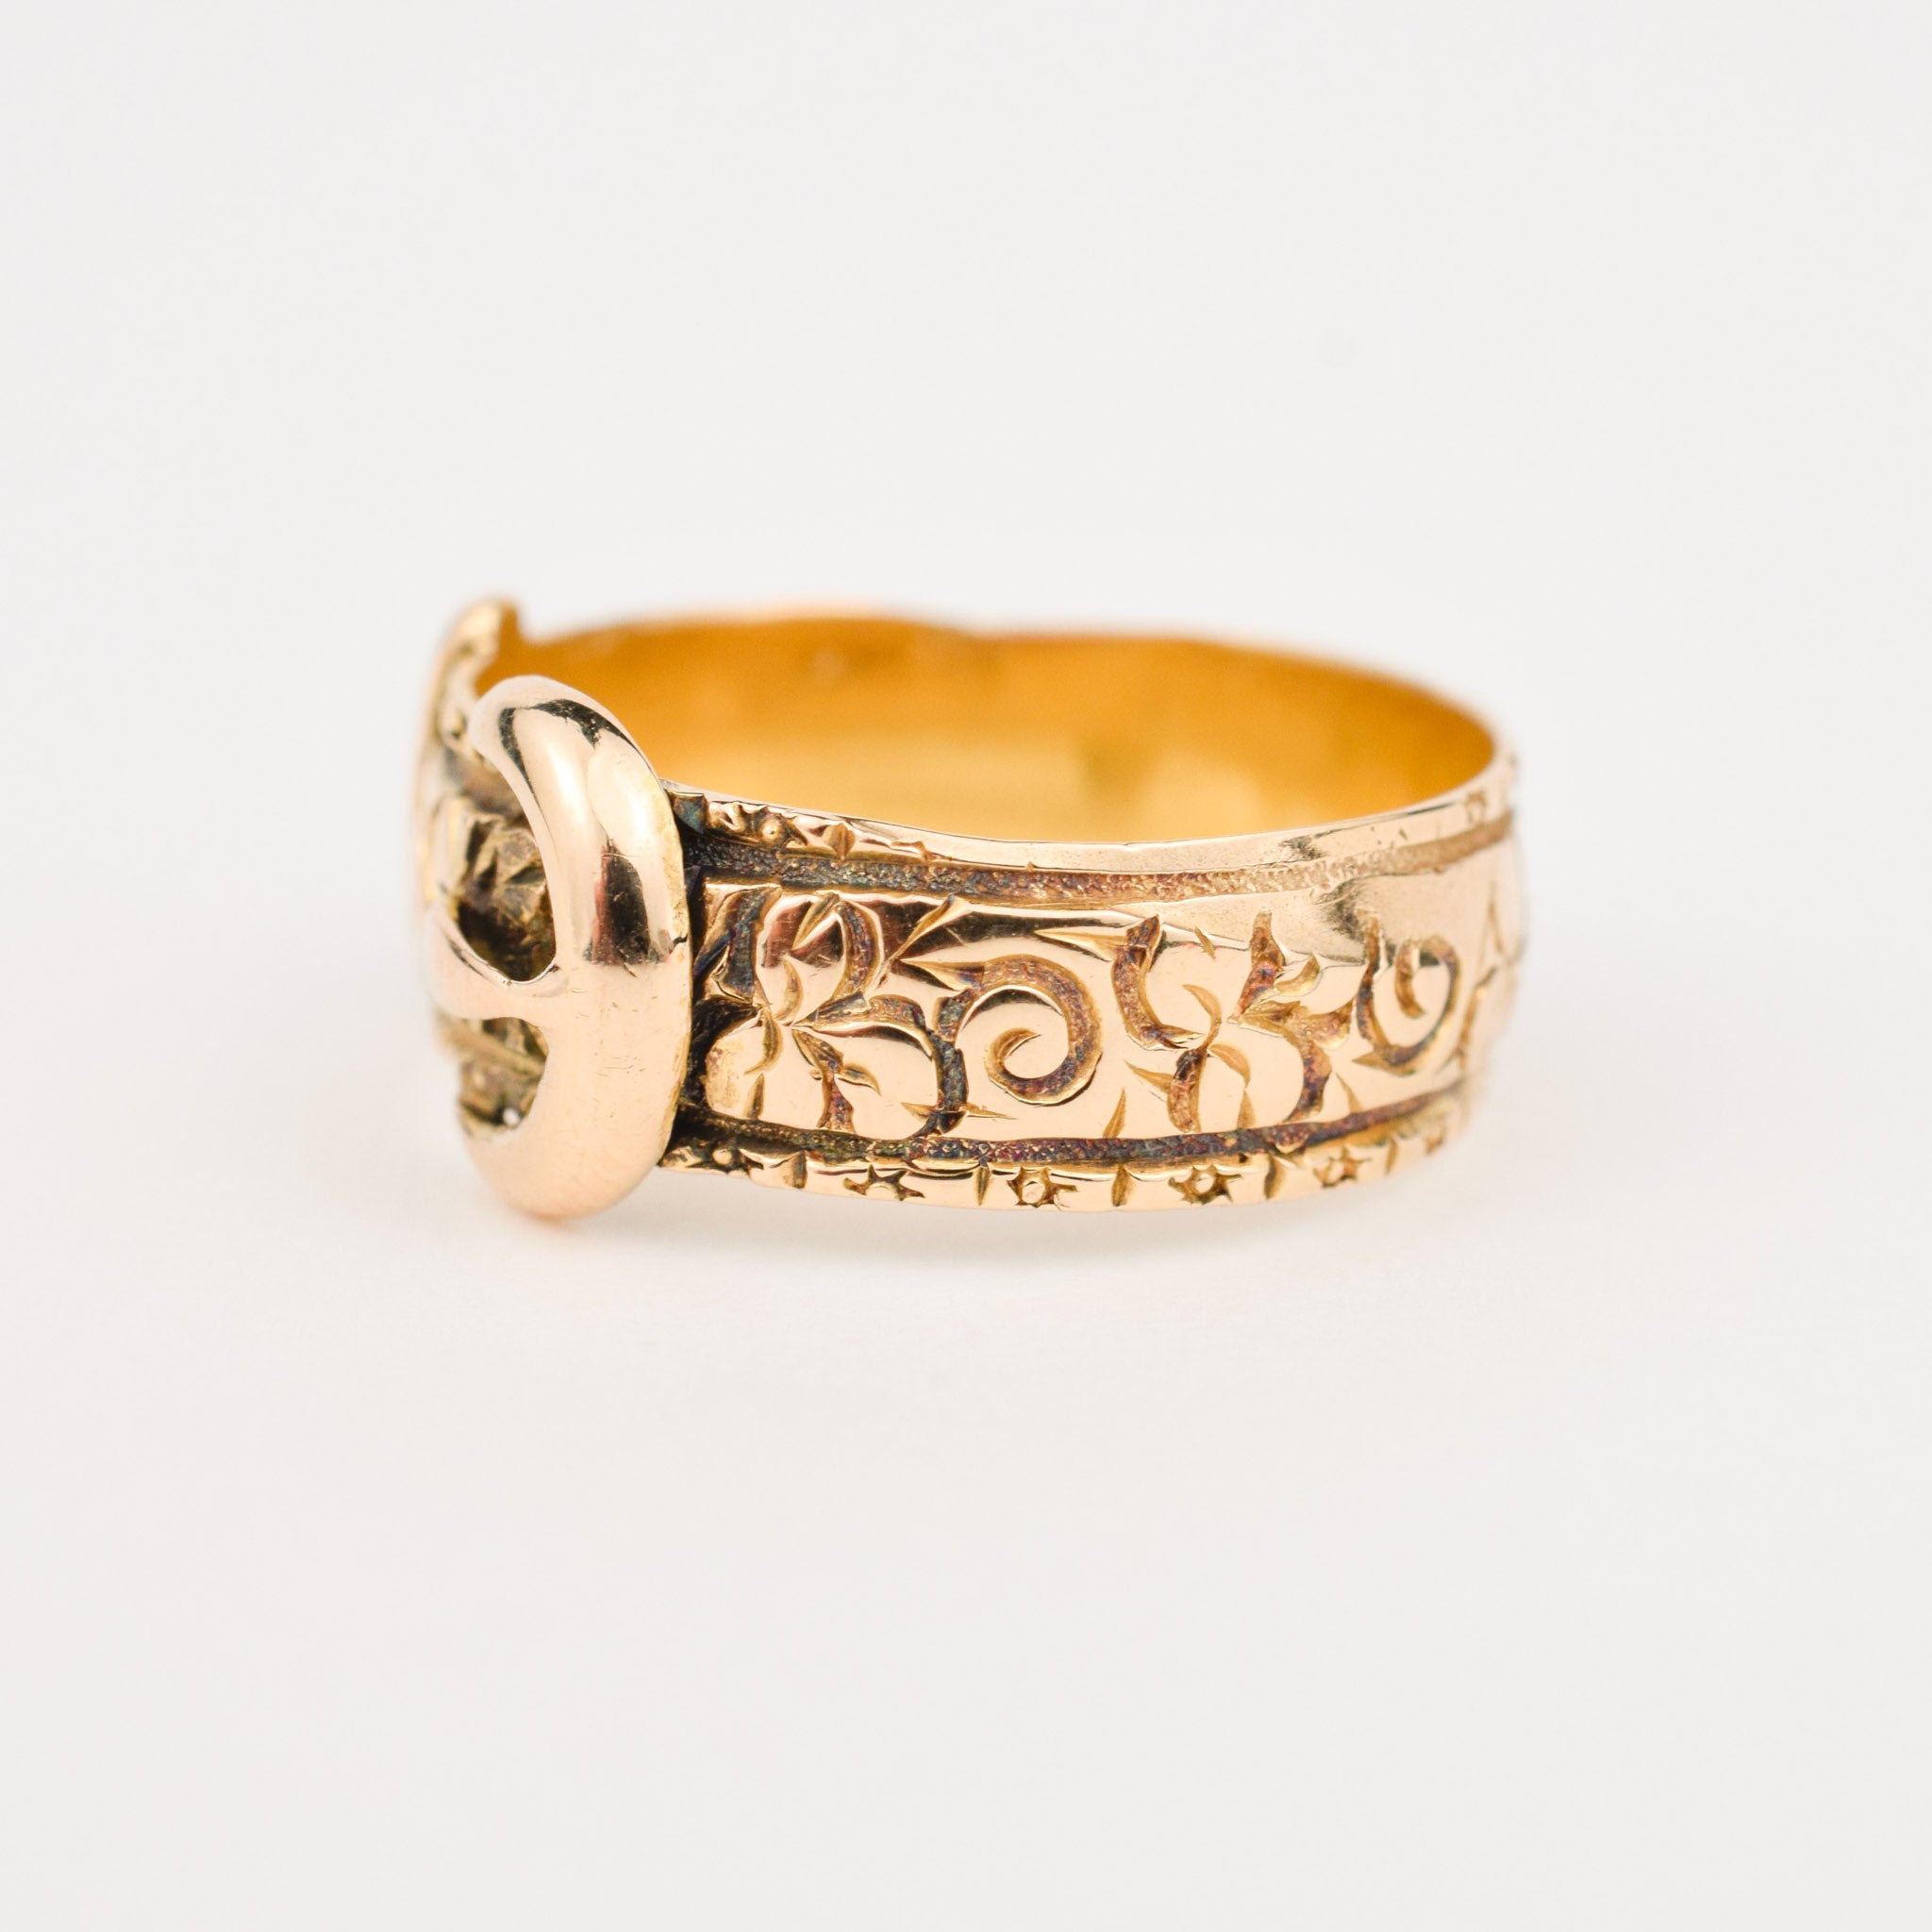 antique gold buckle ring, birmingham 1916, folklor vintage jewelry canada